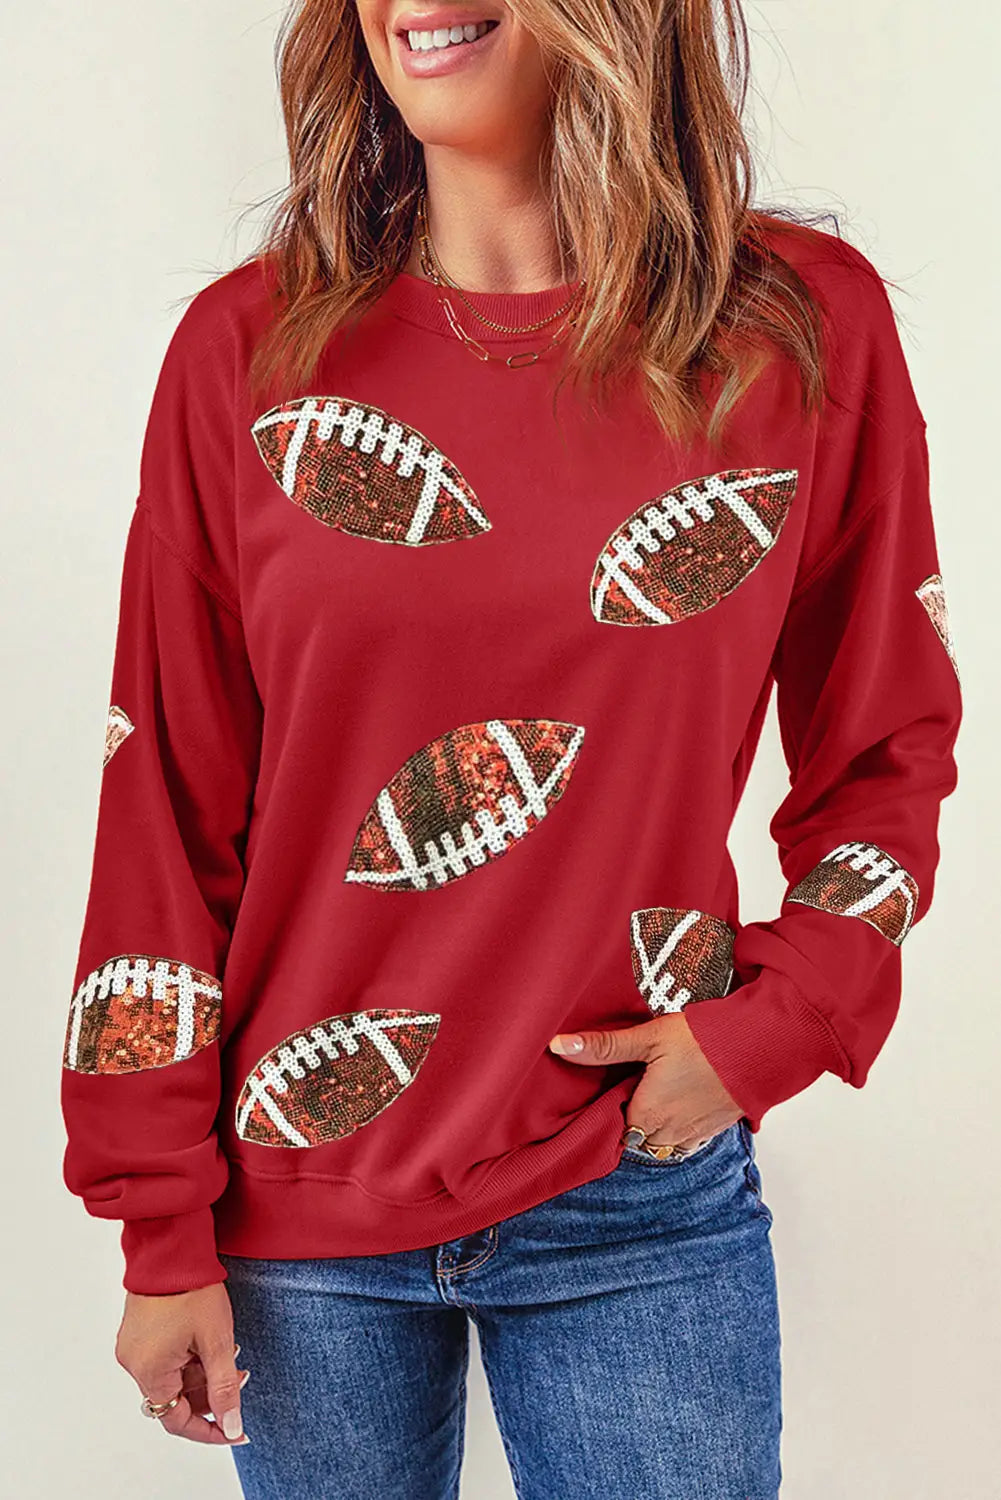 Black sequin fringed rugby casual sweatshirt - red-2 / 2xl / 70% polyester + 30% cotton - graphic